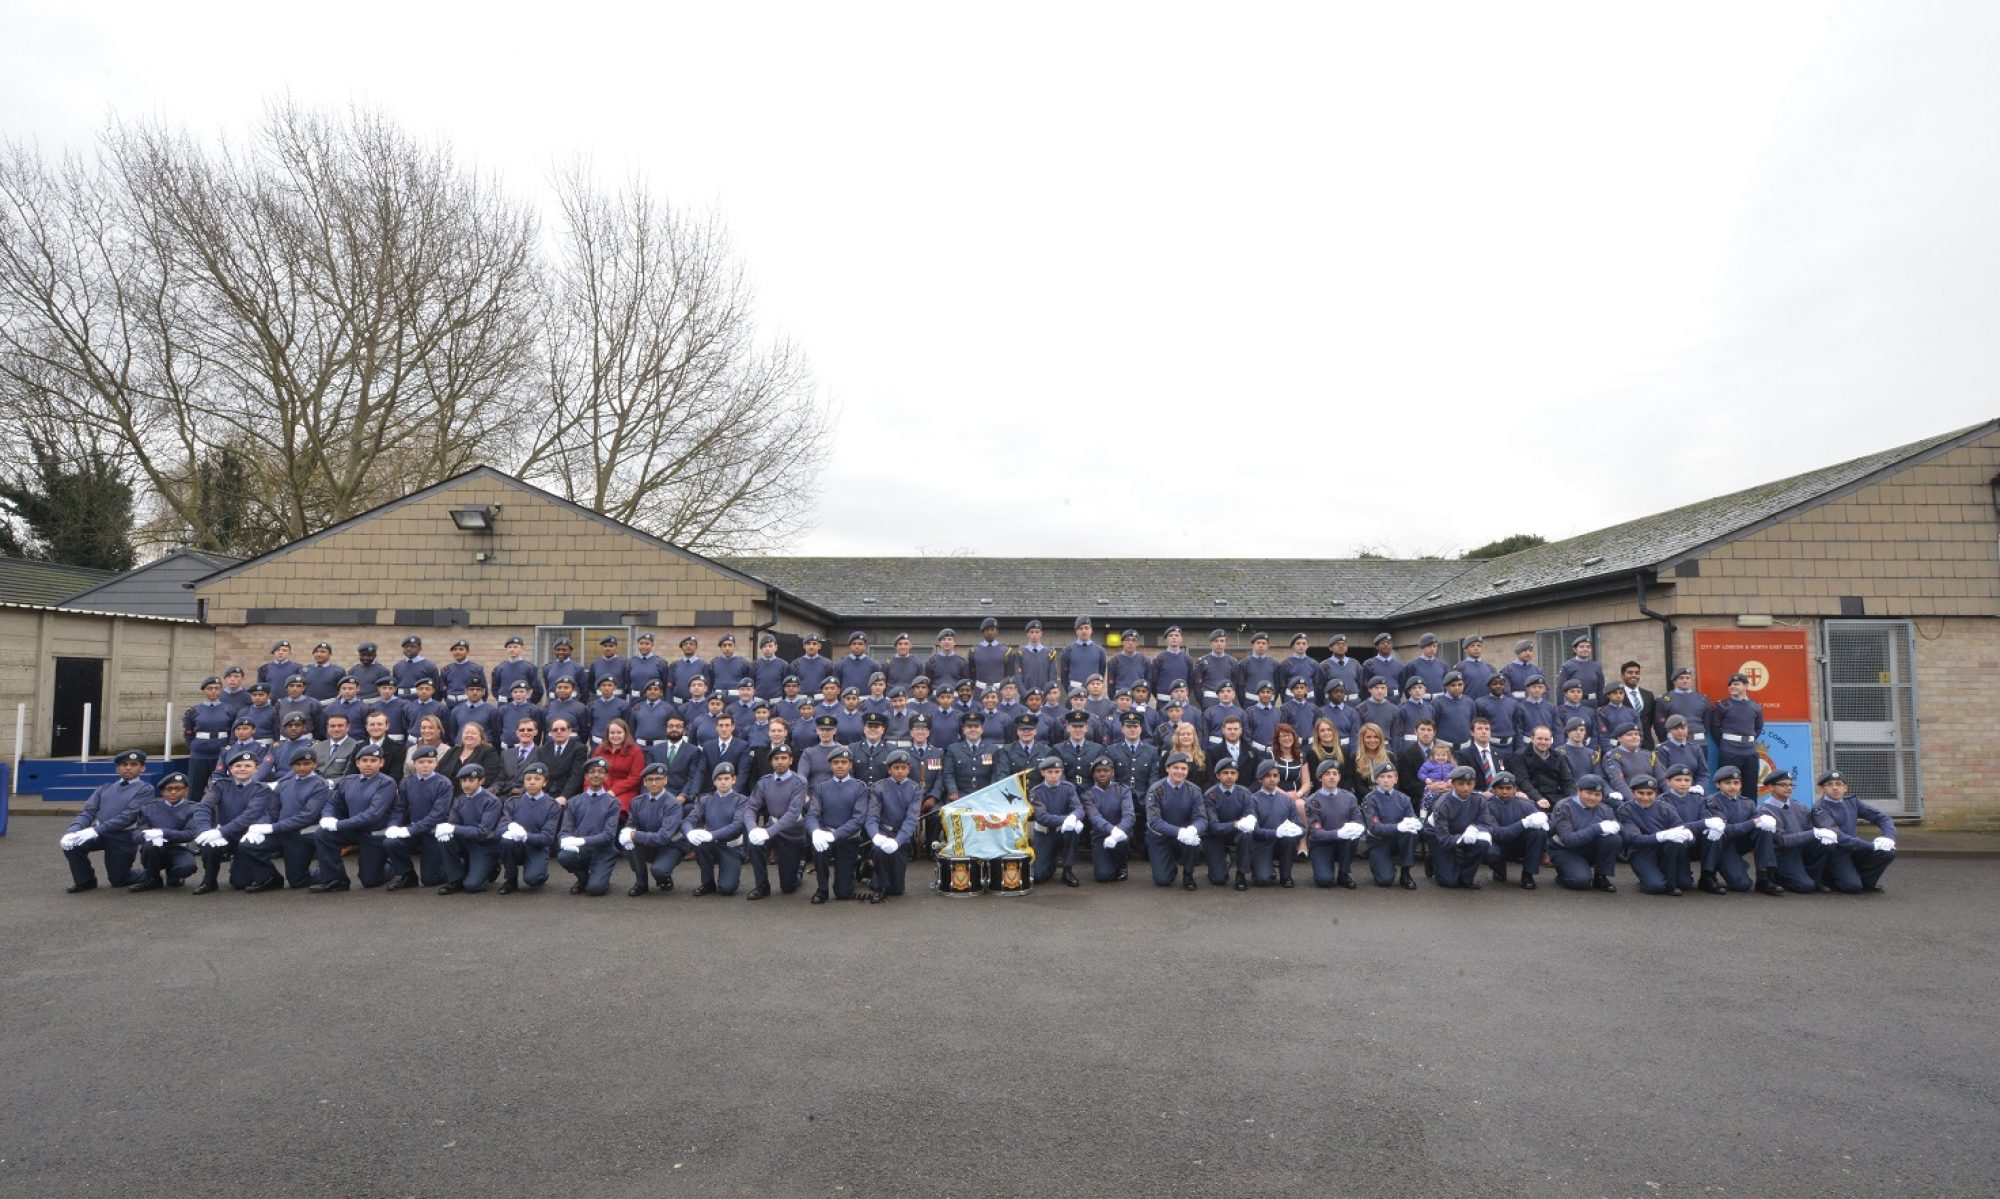 241 (Wanstead & Woodford) Squadron 